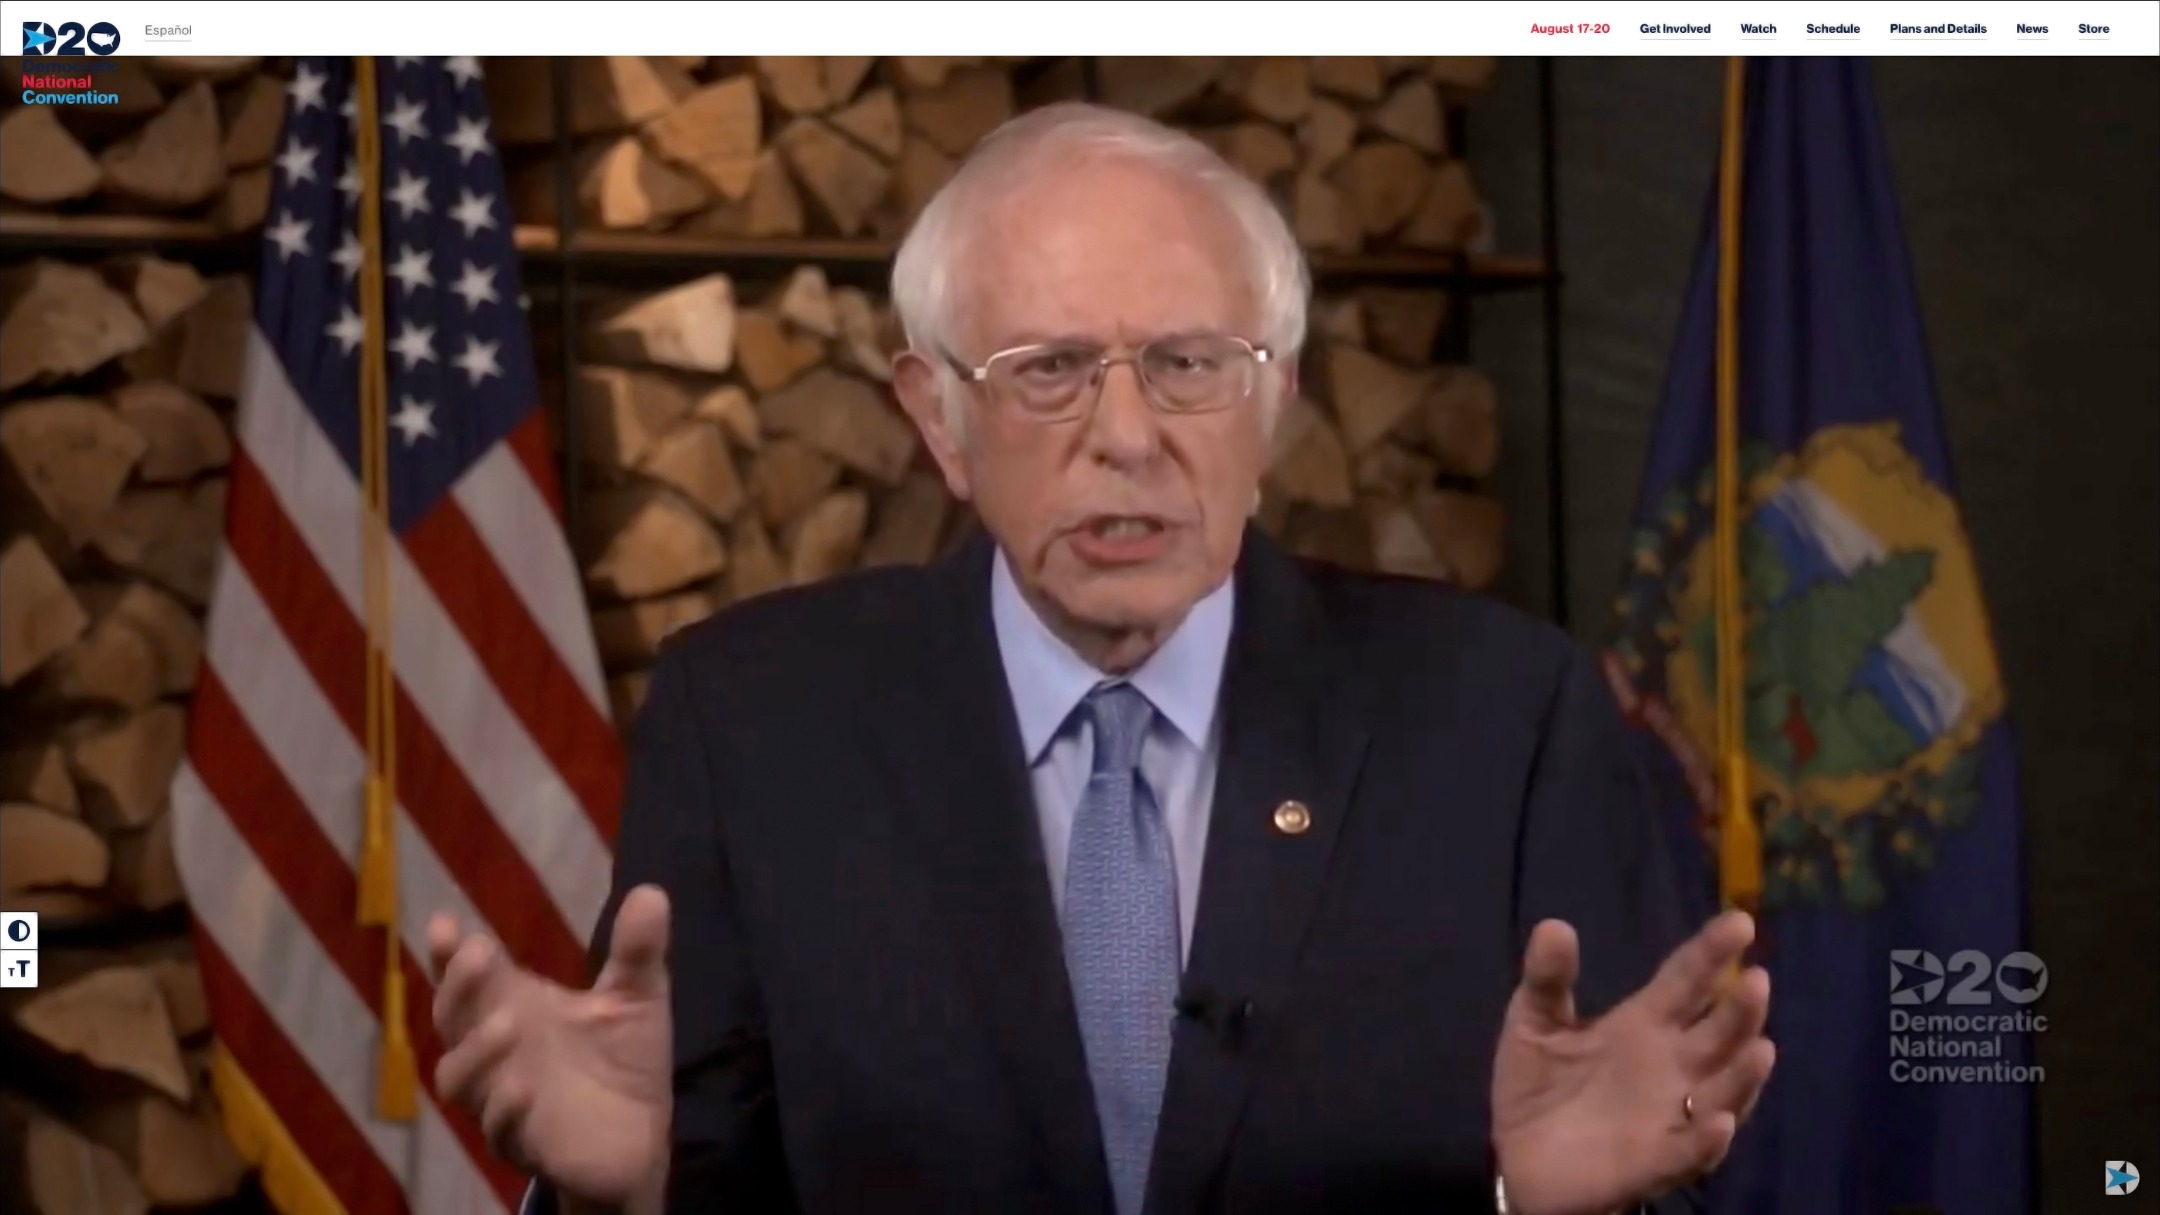 In this screenshot from the DNCC’s livestream of the 2020 Democratic National Convention, Sen. Bernie Sanders (I-VT) addresses the virtual convention on August 17, 2020. (Handout/DNCC via Getty Images)